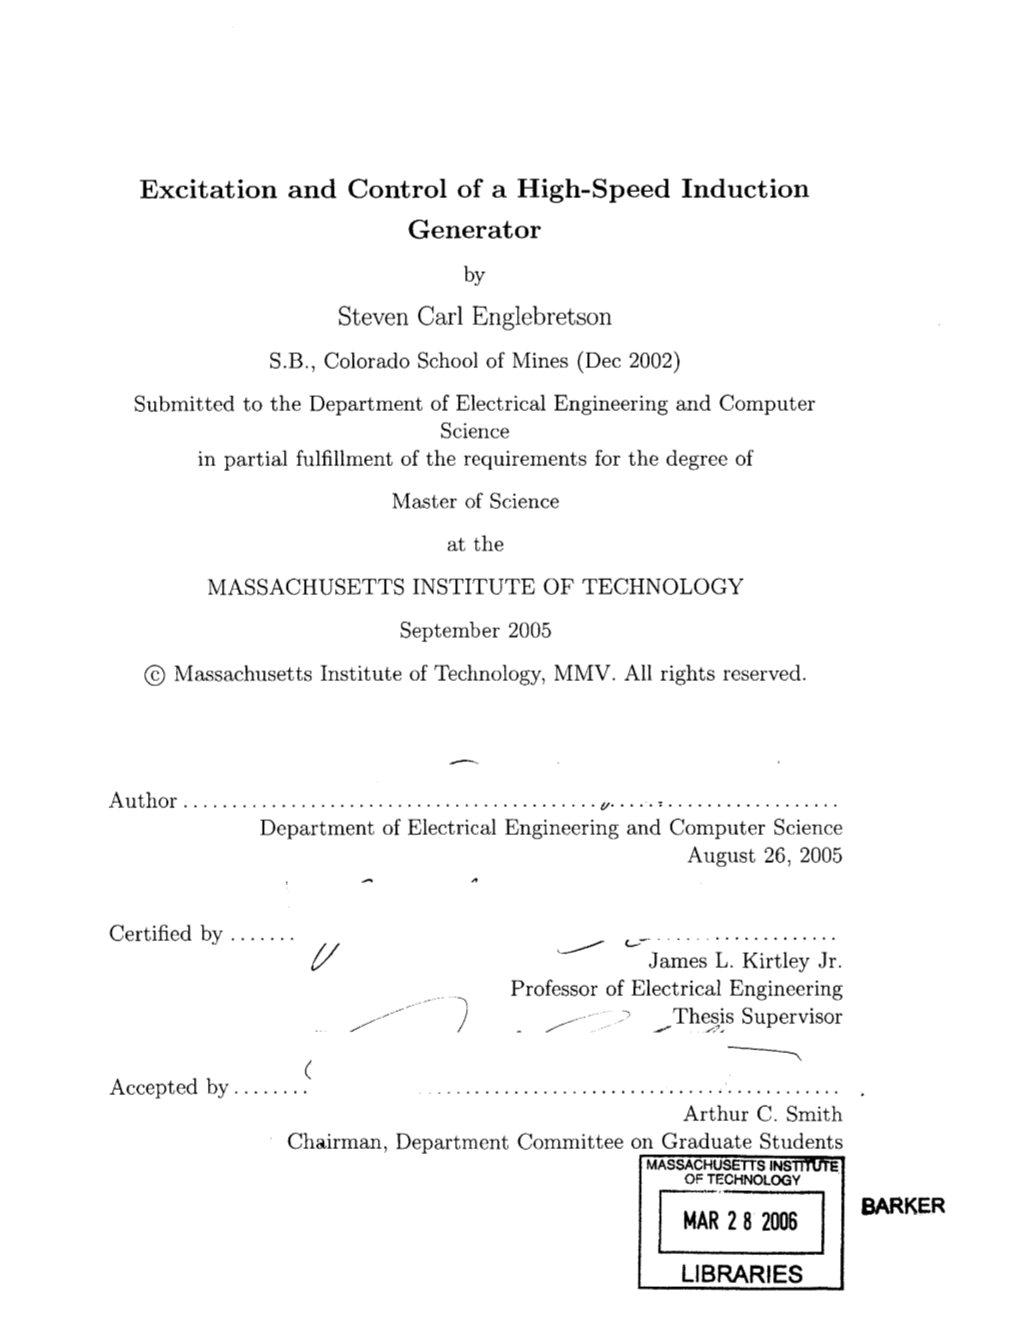 Excitation and Control of a High-Speed Induction Generator